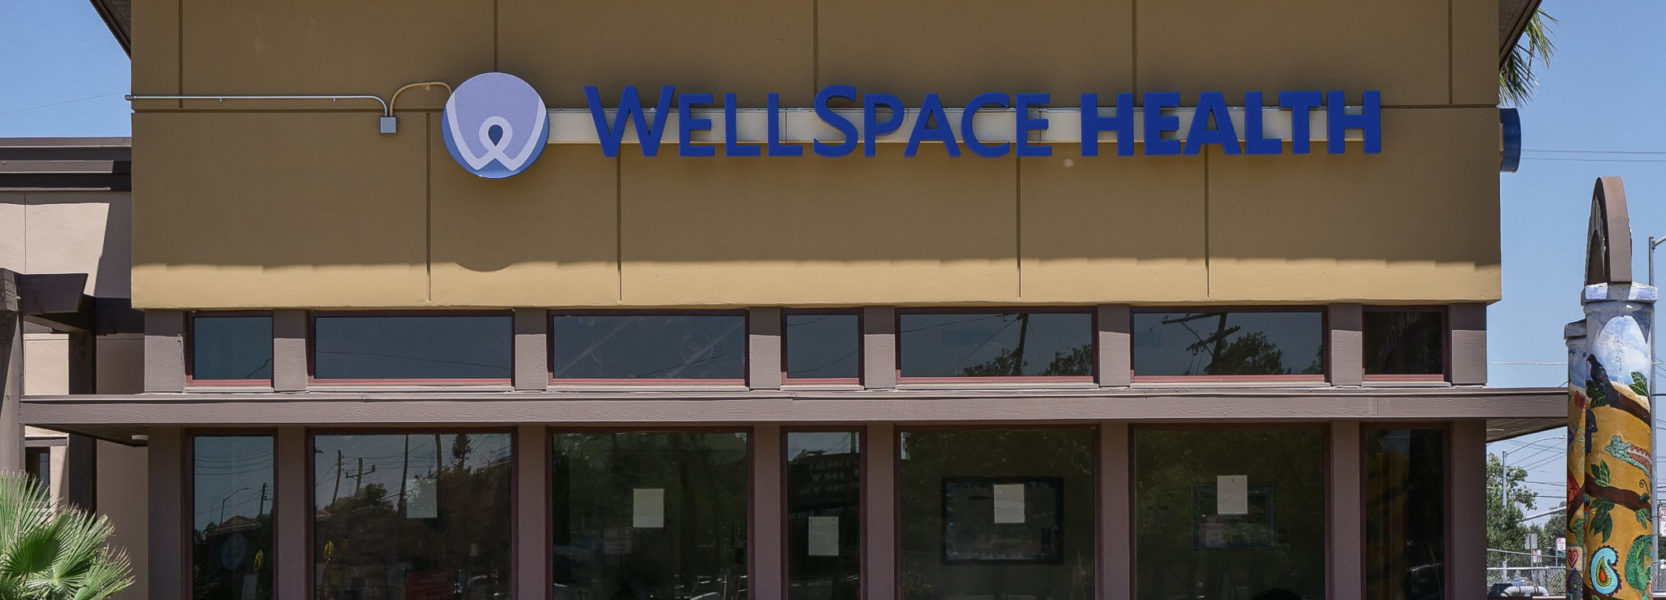 WellSpace Health - Del Paso Heights Community Health Center